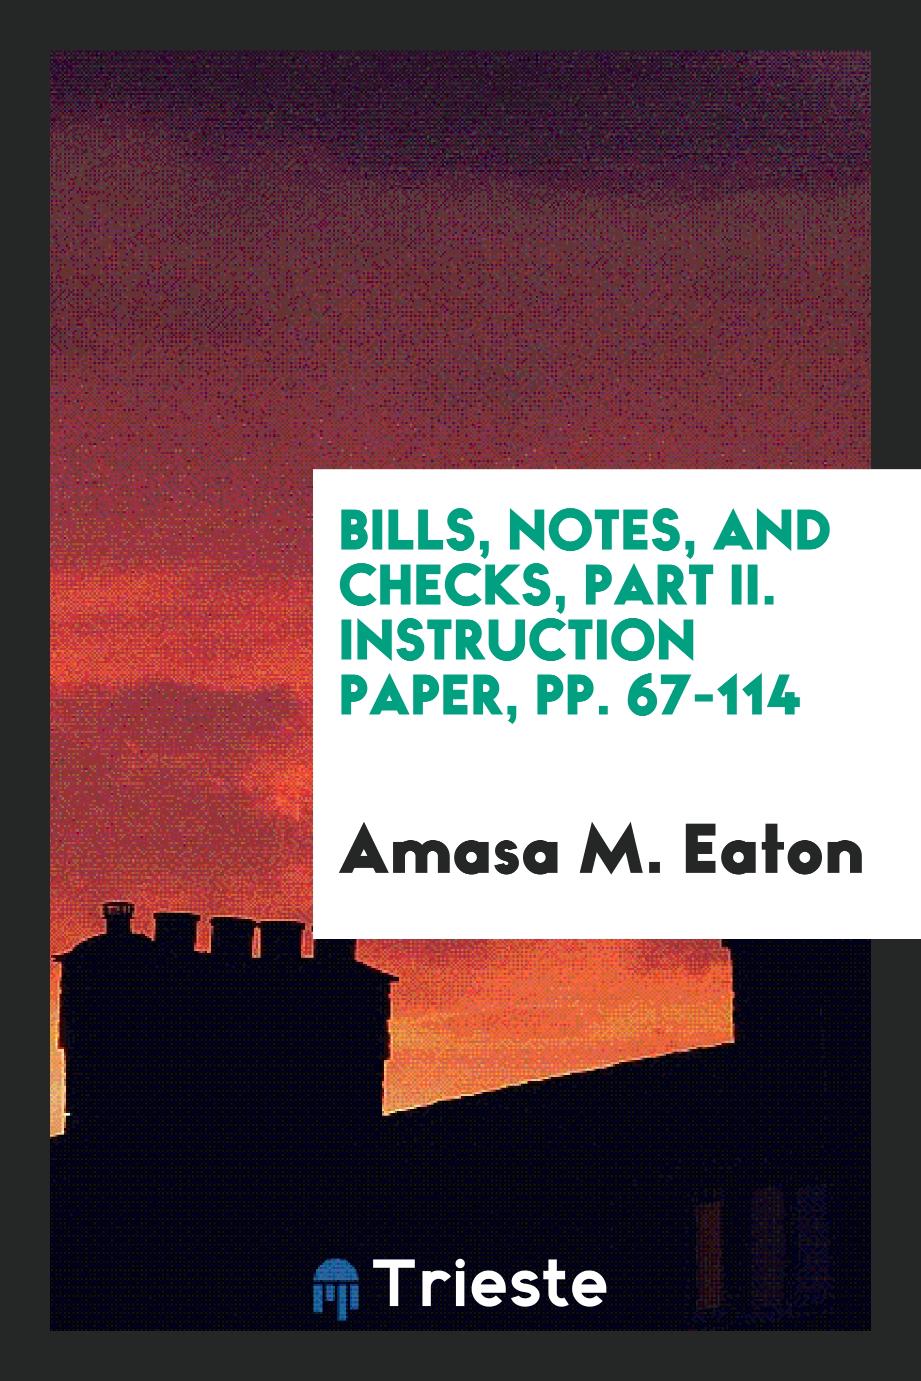 Bills, Notes, and Checks, Part II. Instruction Paper, pp. 67-114